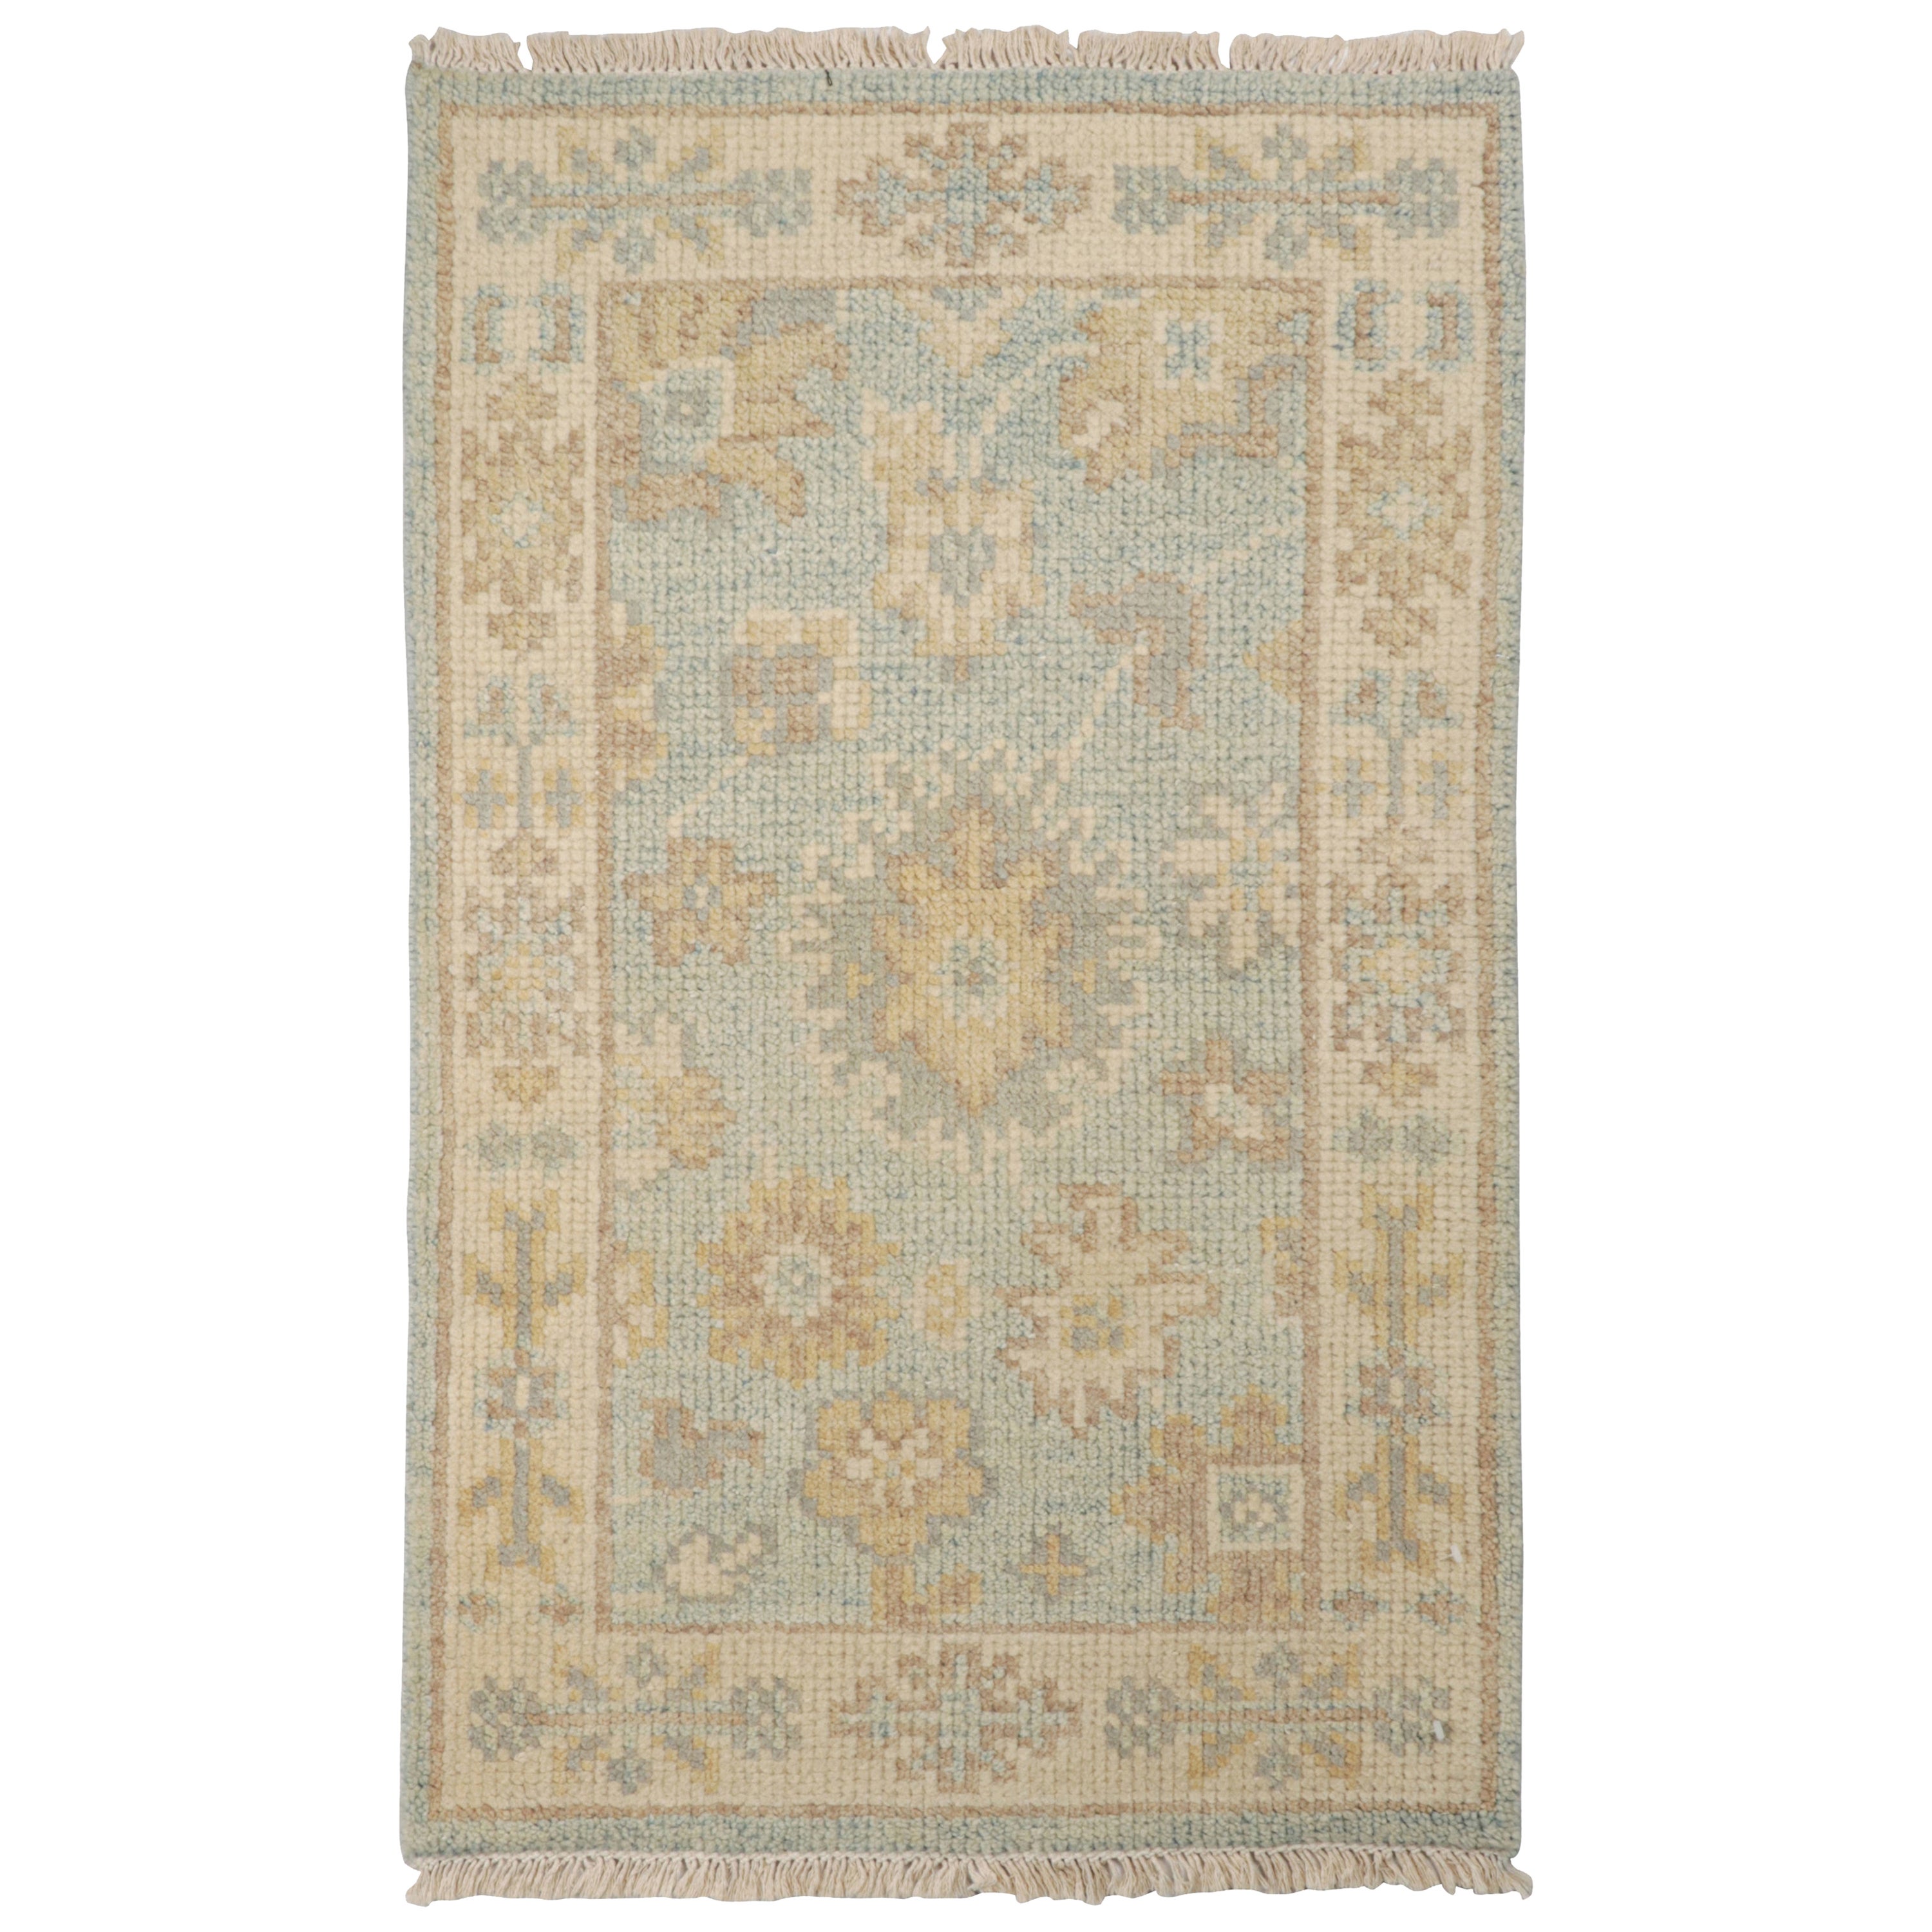 Rug and Kilim’s Oushak Style Rug with Beige-Brown, Blue and Gold Floral ...